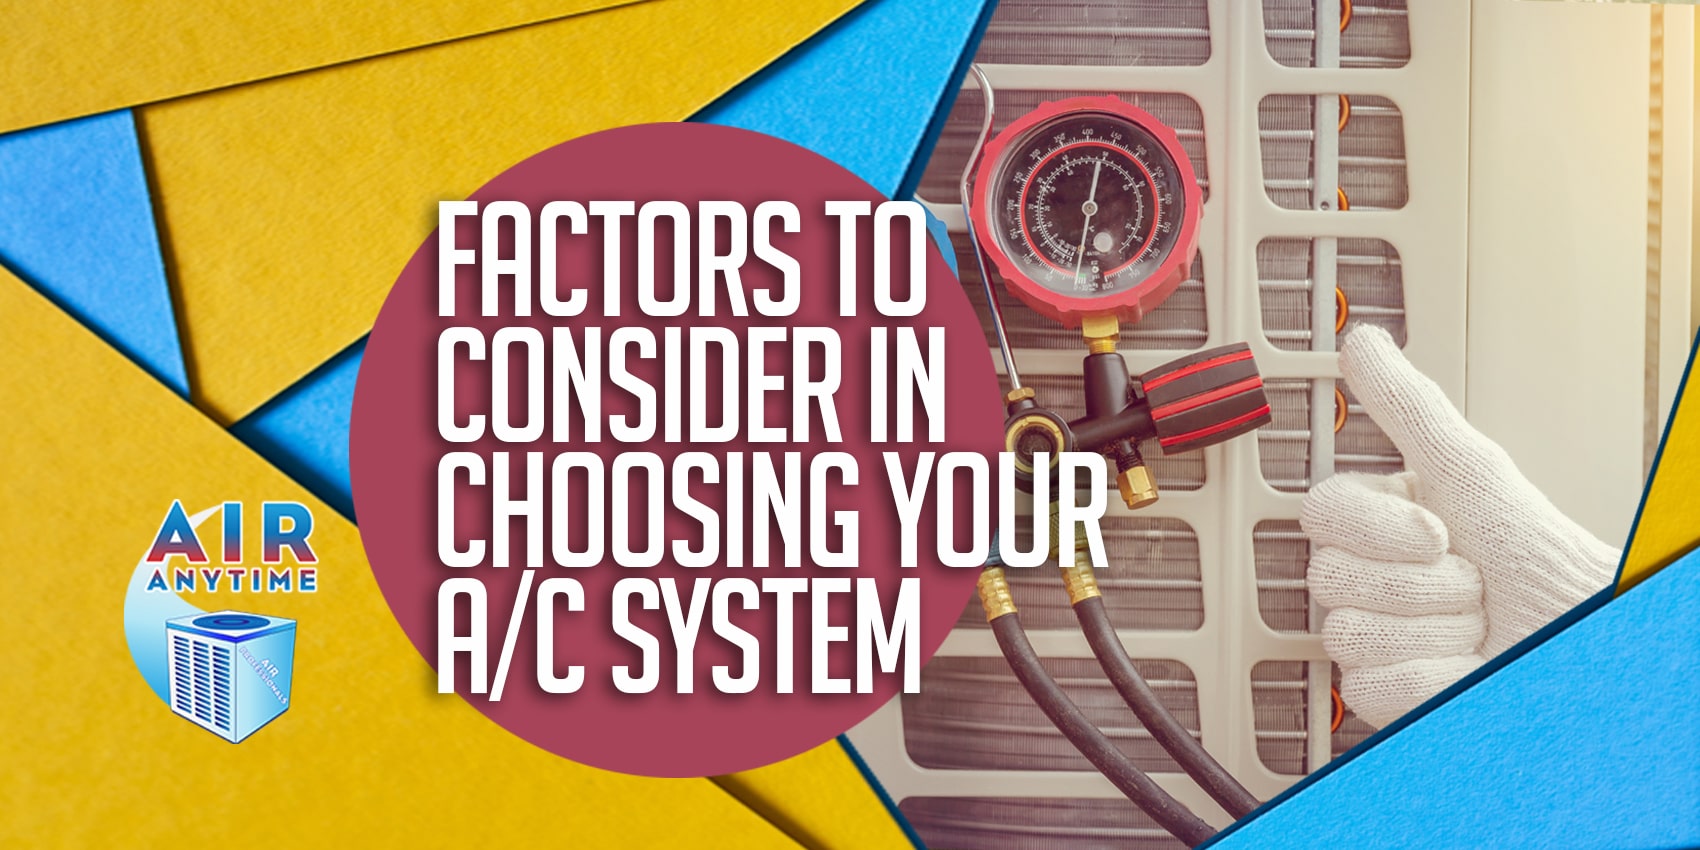 Factors to Consider in Choosing Your A/C System